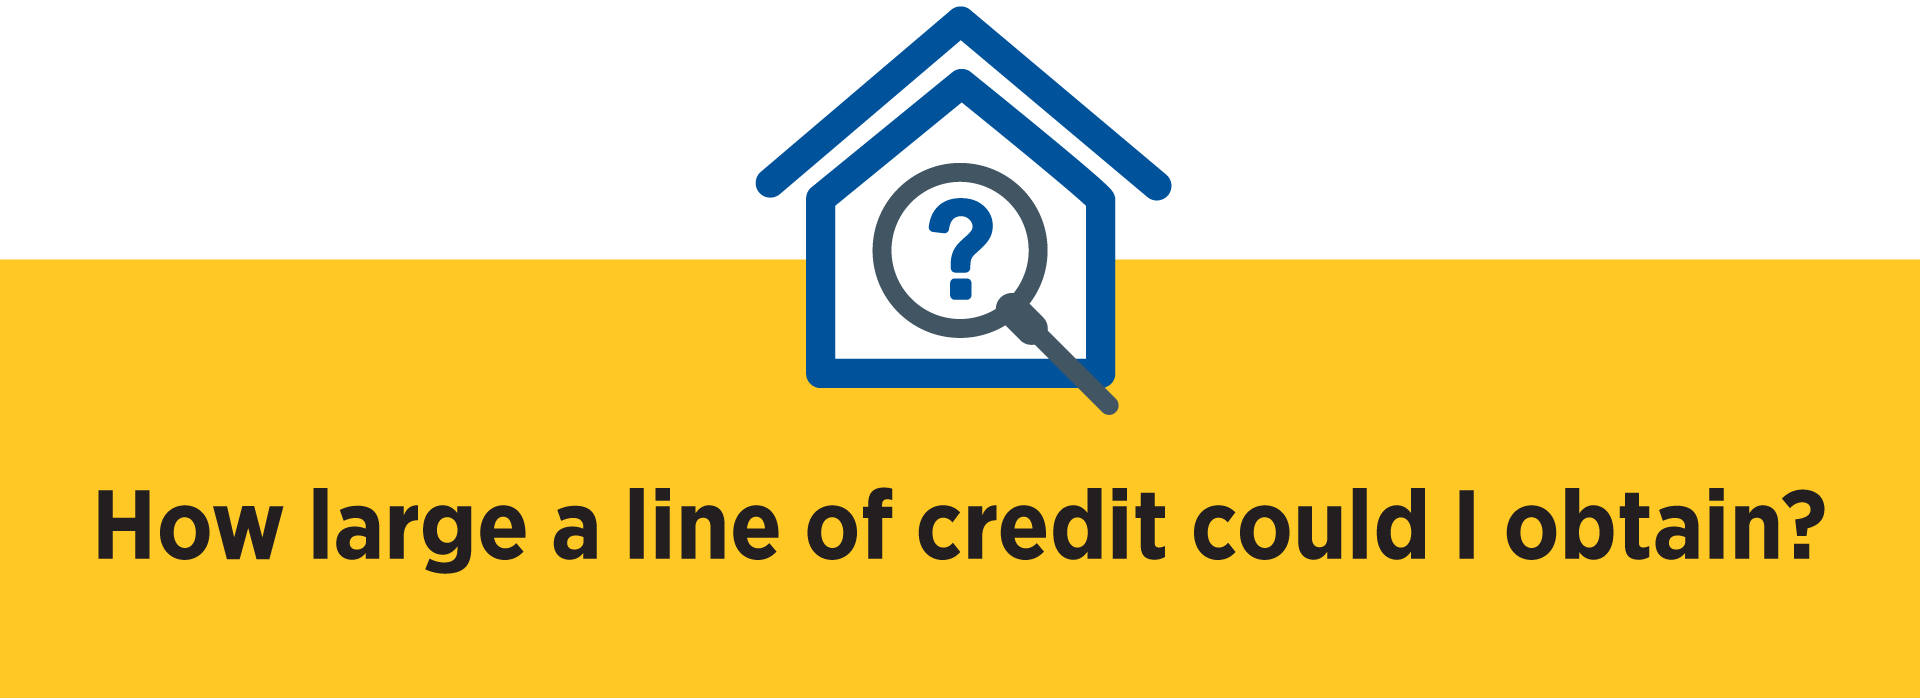 How large a line of credit could I obtain?